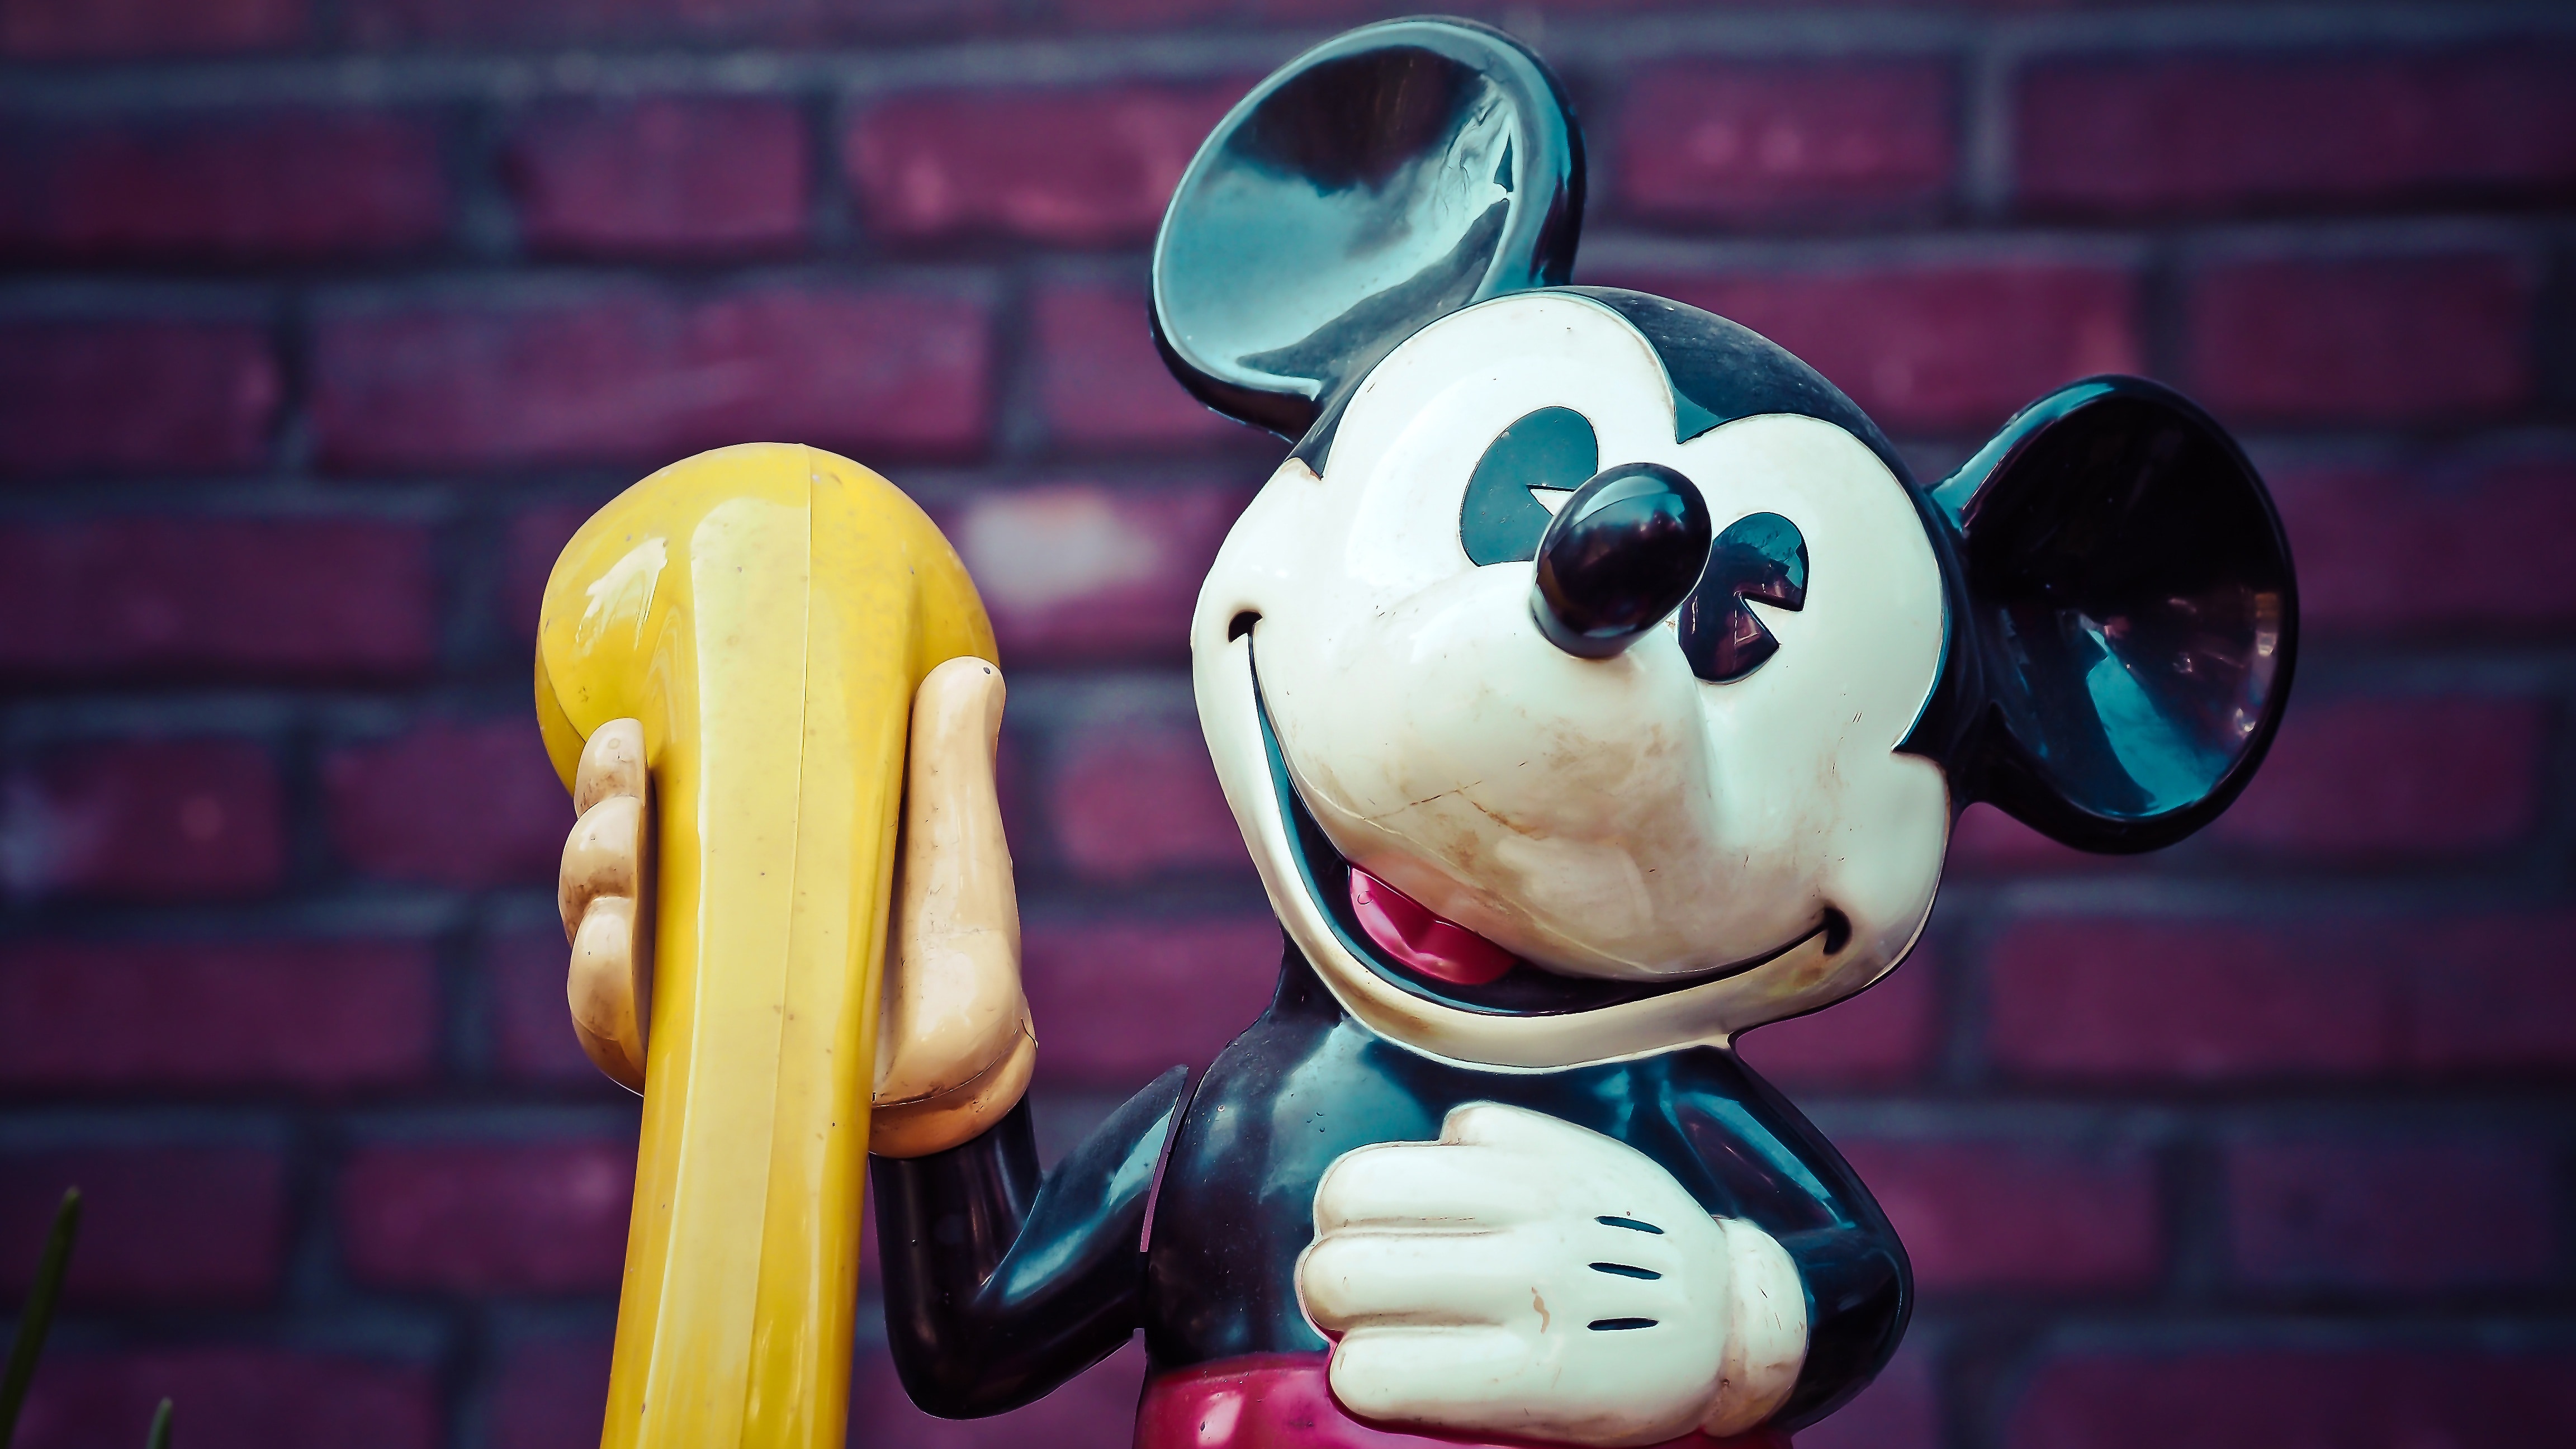 mickey mouse holding telephone figurine